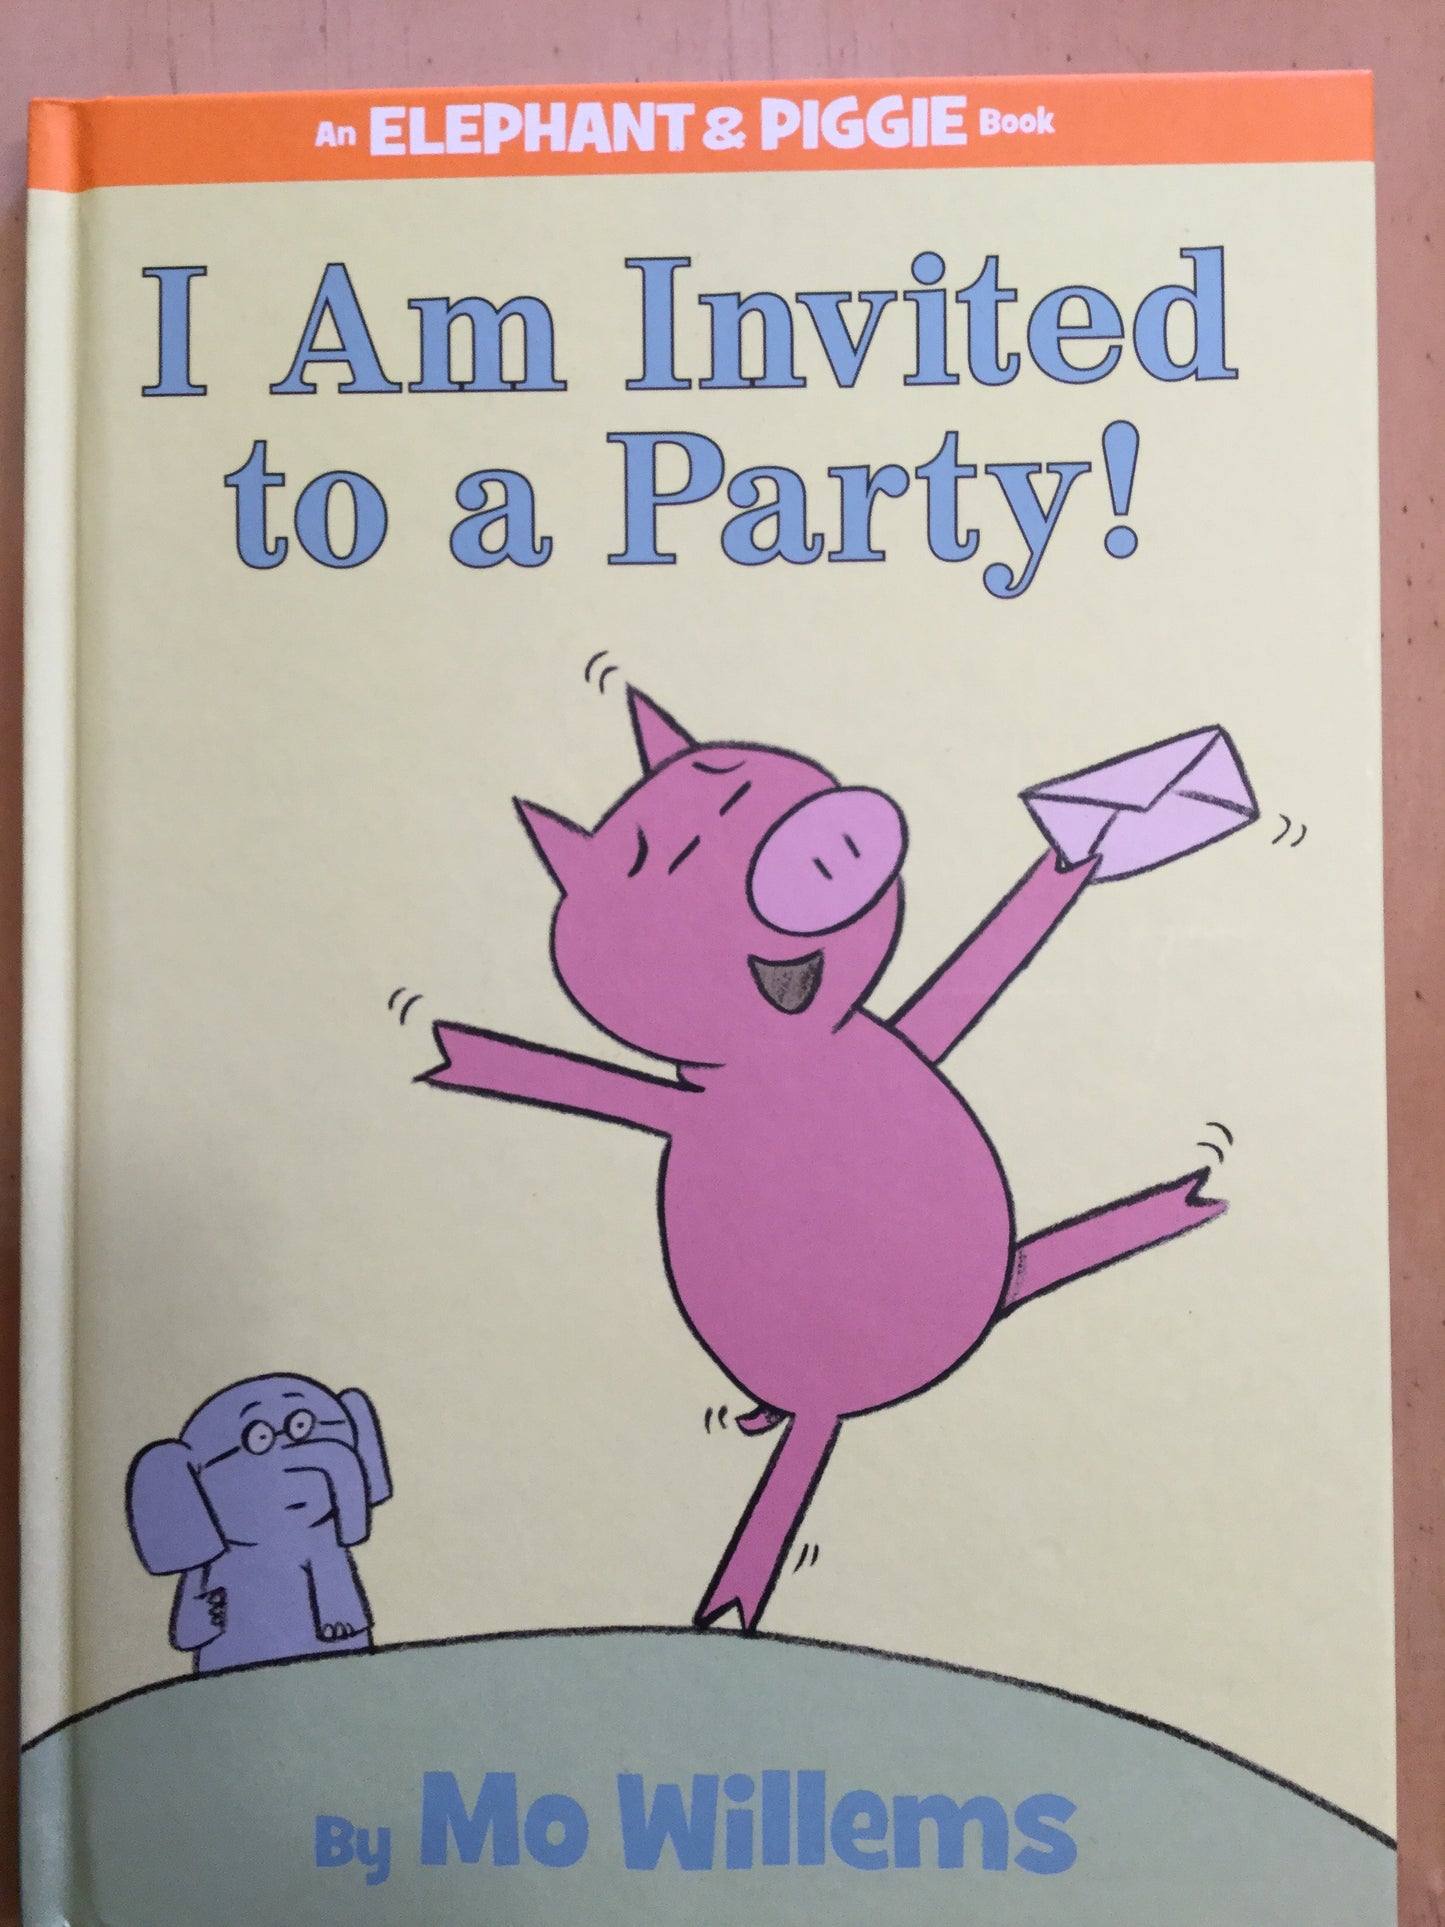 I am Invited to a Party!